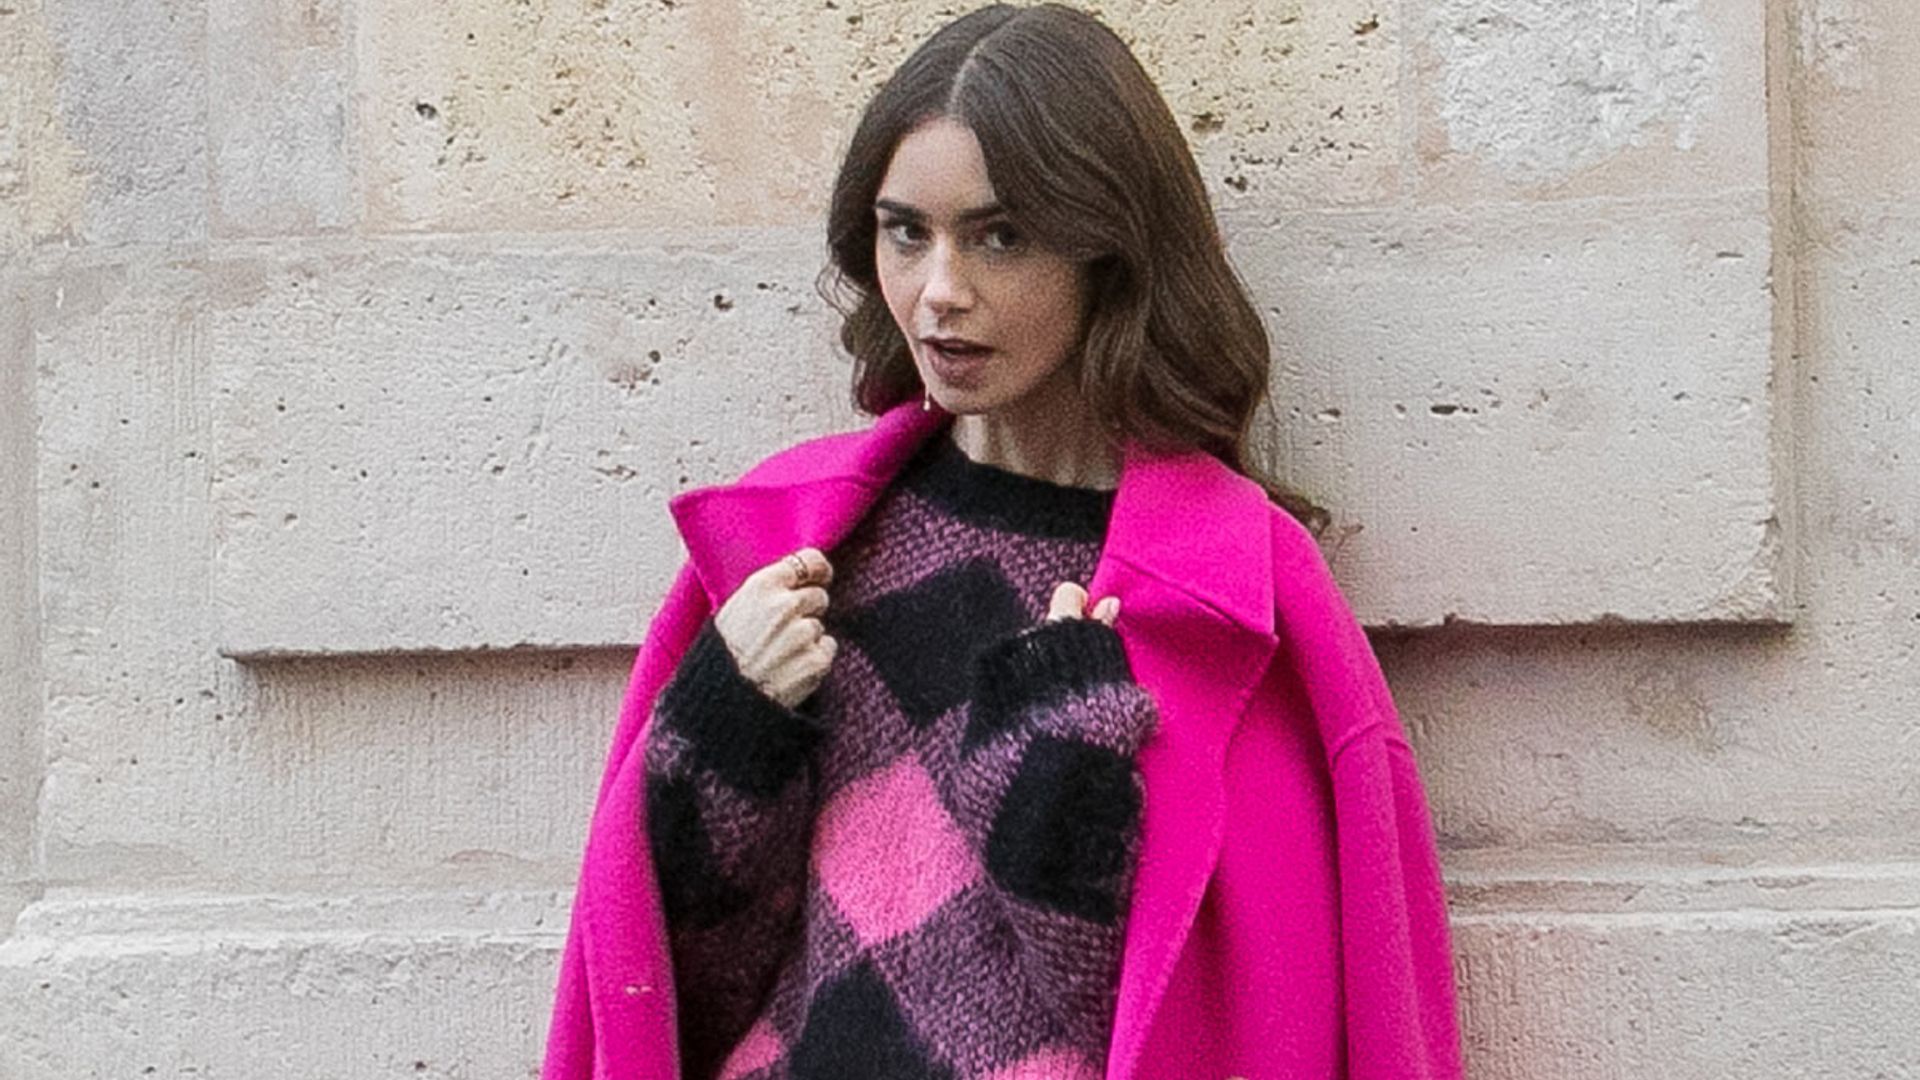 Primark's pink blazer dress is giving us total Emily in Paris vibes